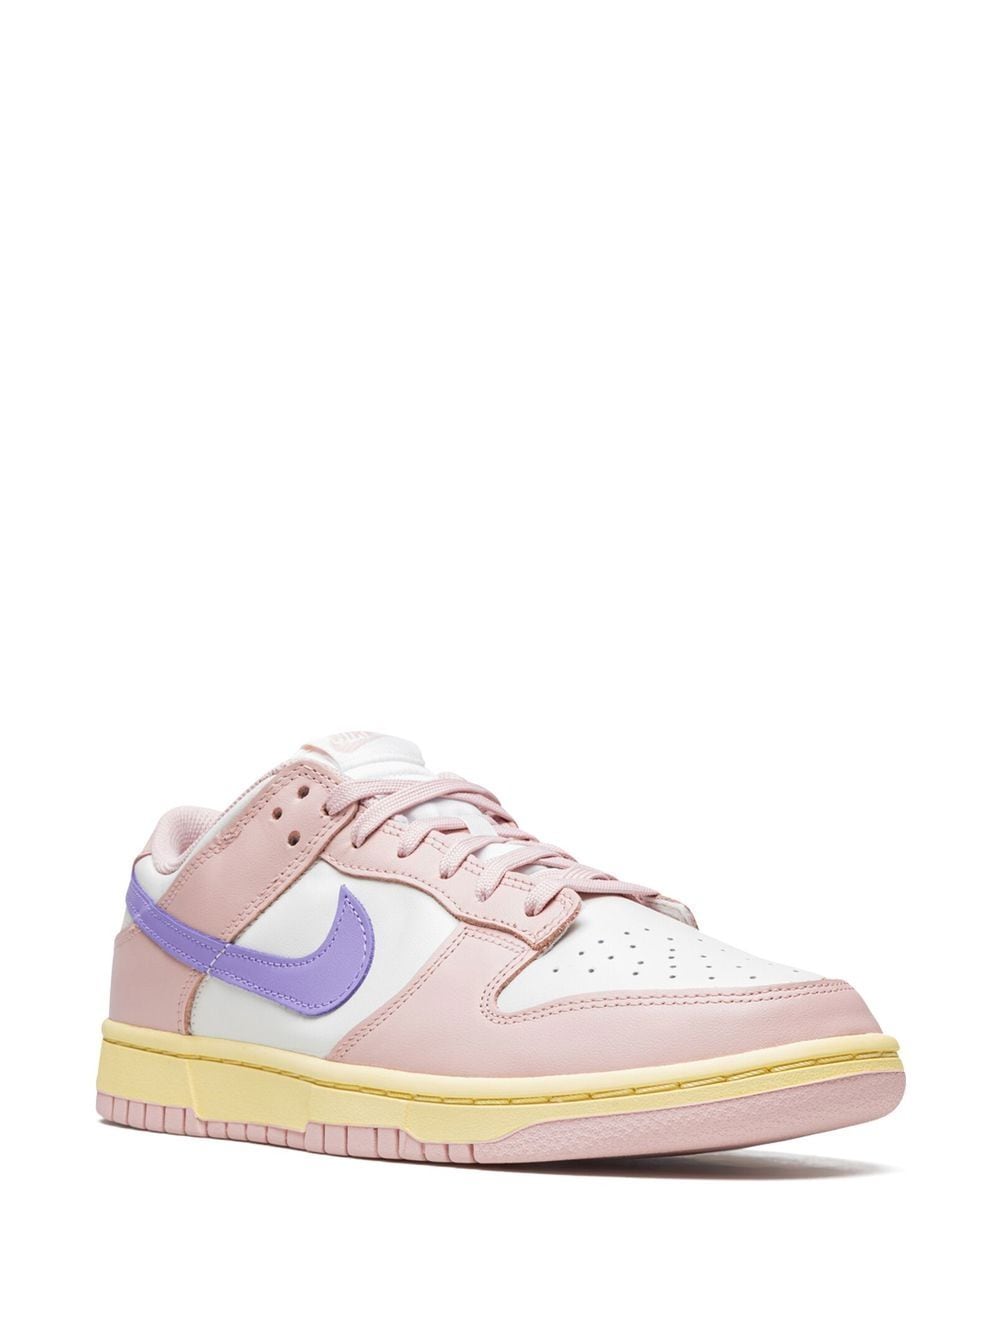 NIKE WMNS DUNK LOW Pink Oxford ピンク 24